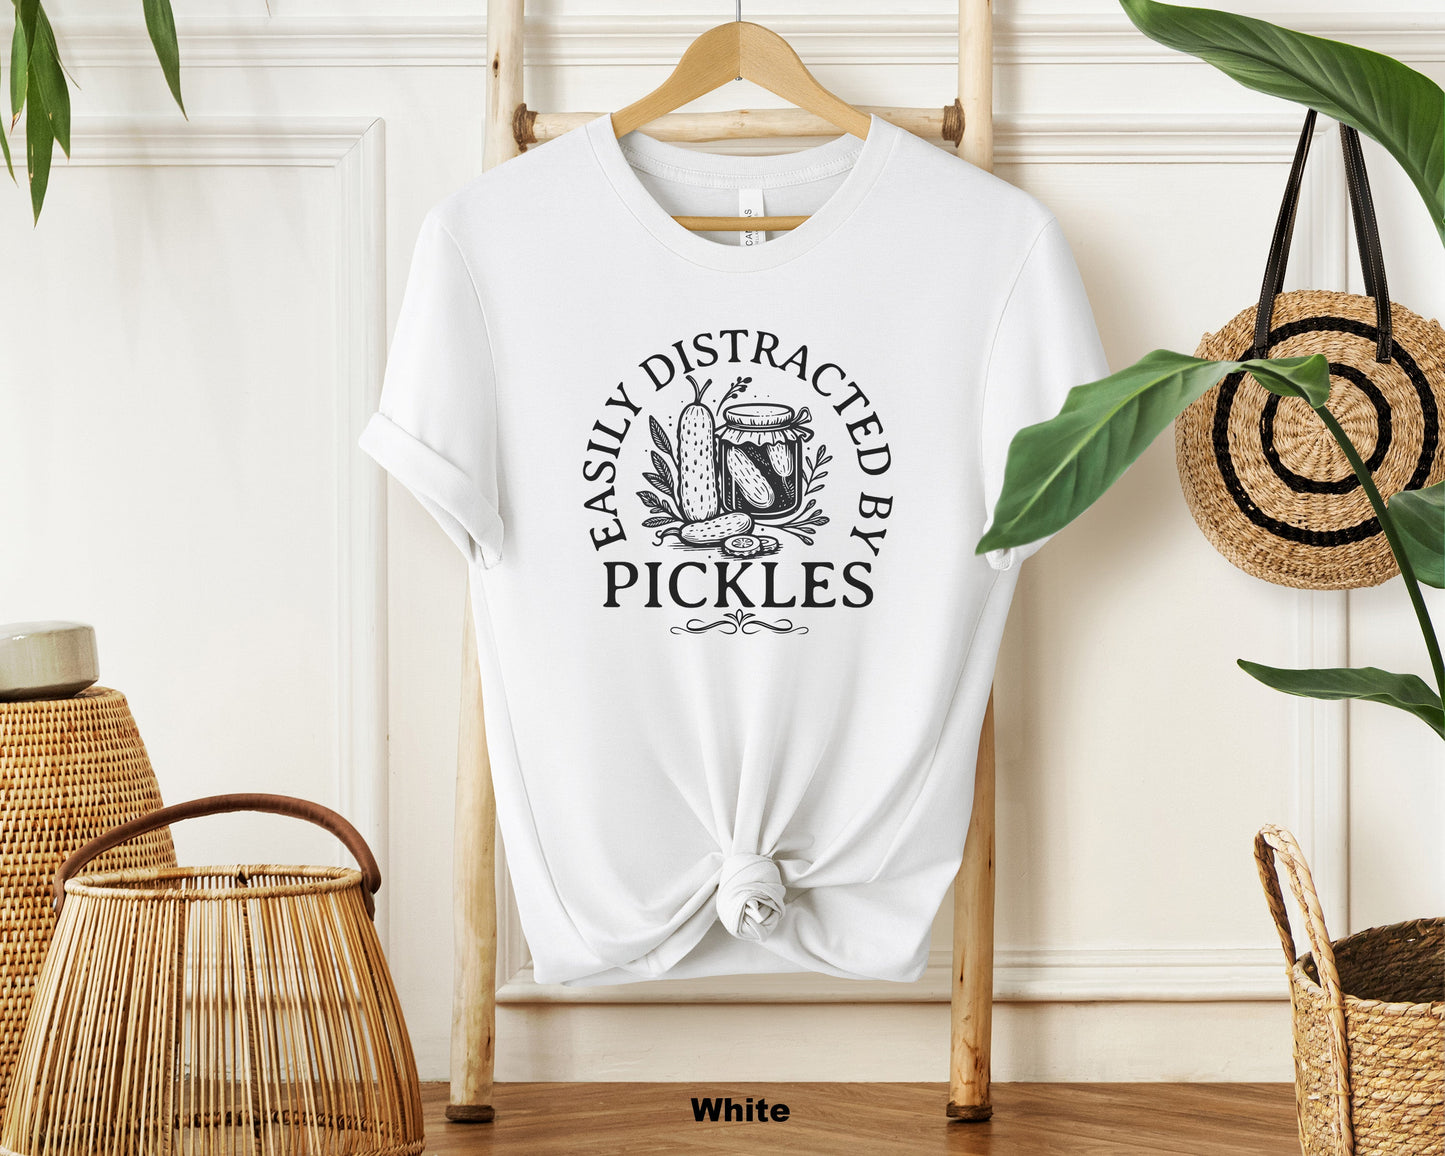 Pickle Obsession Crewneck Tee - Vibrant Pickle Design Shirt for Foodies